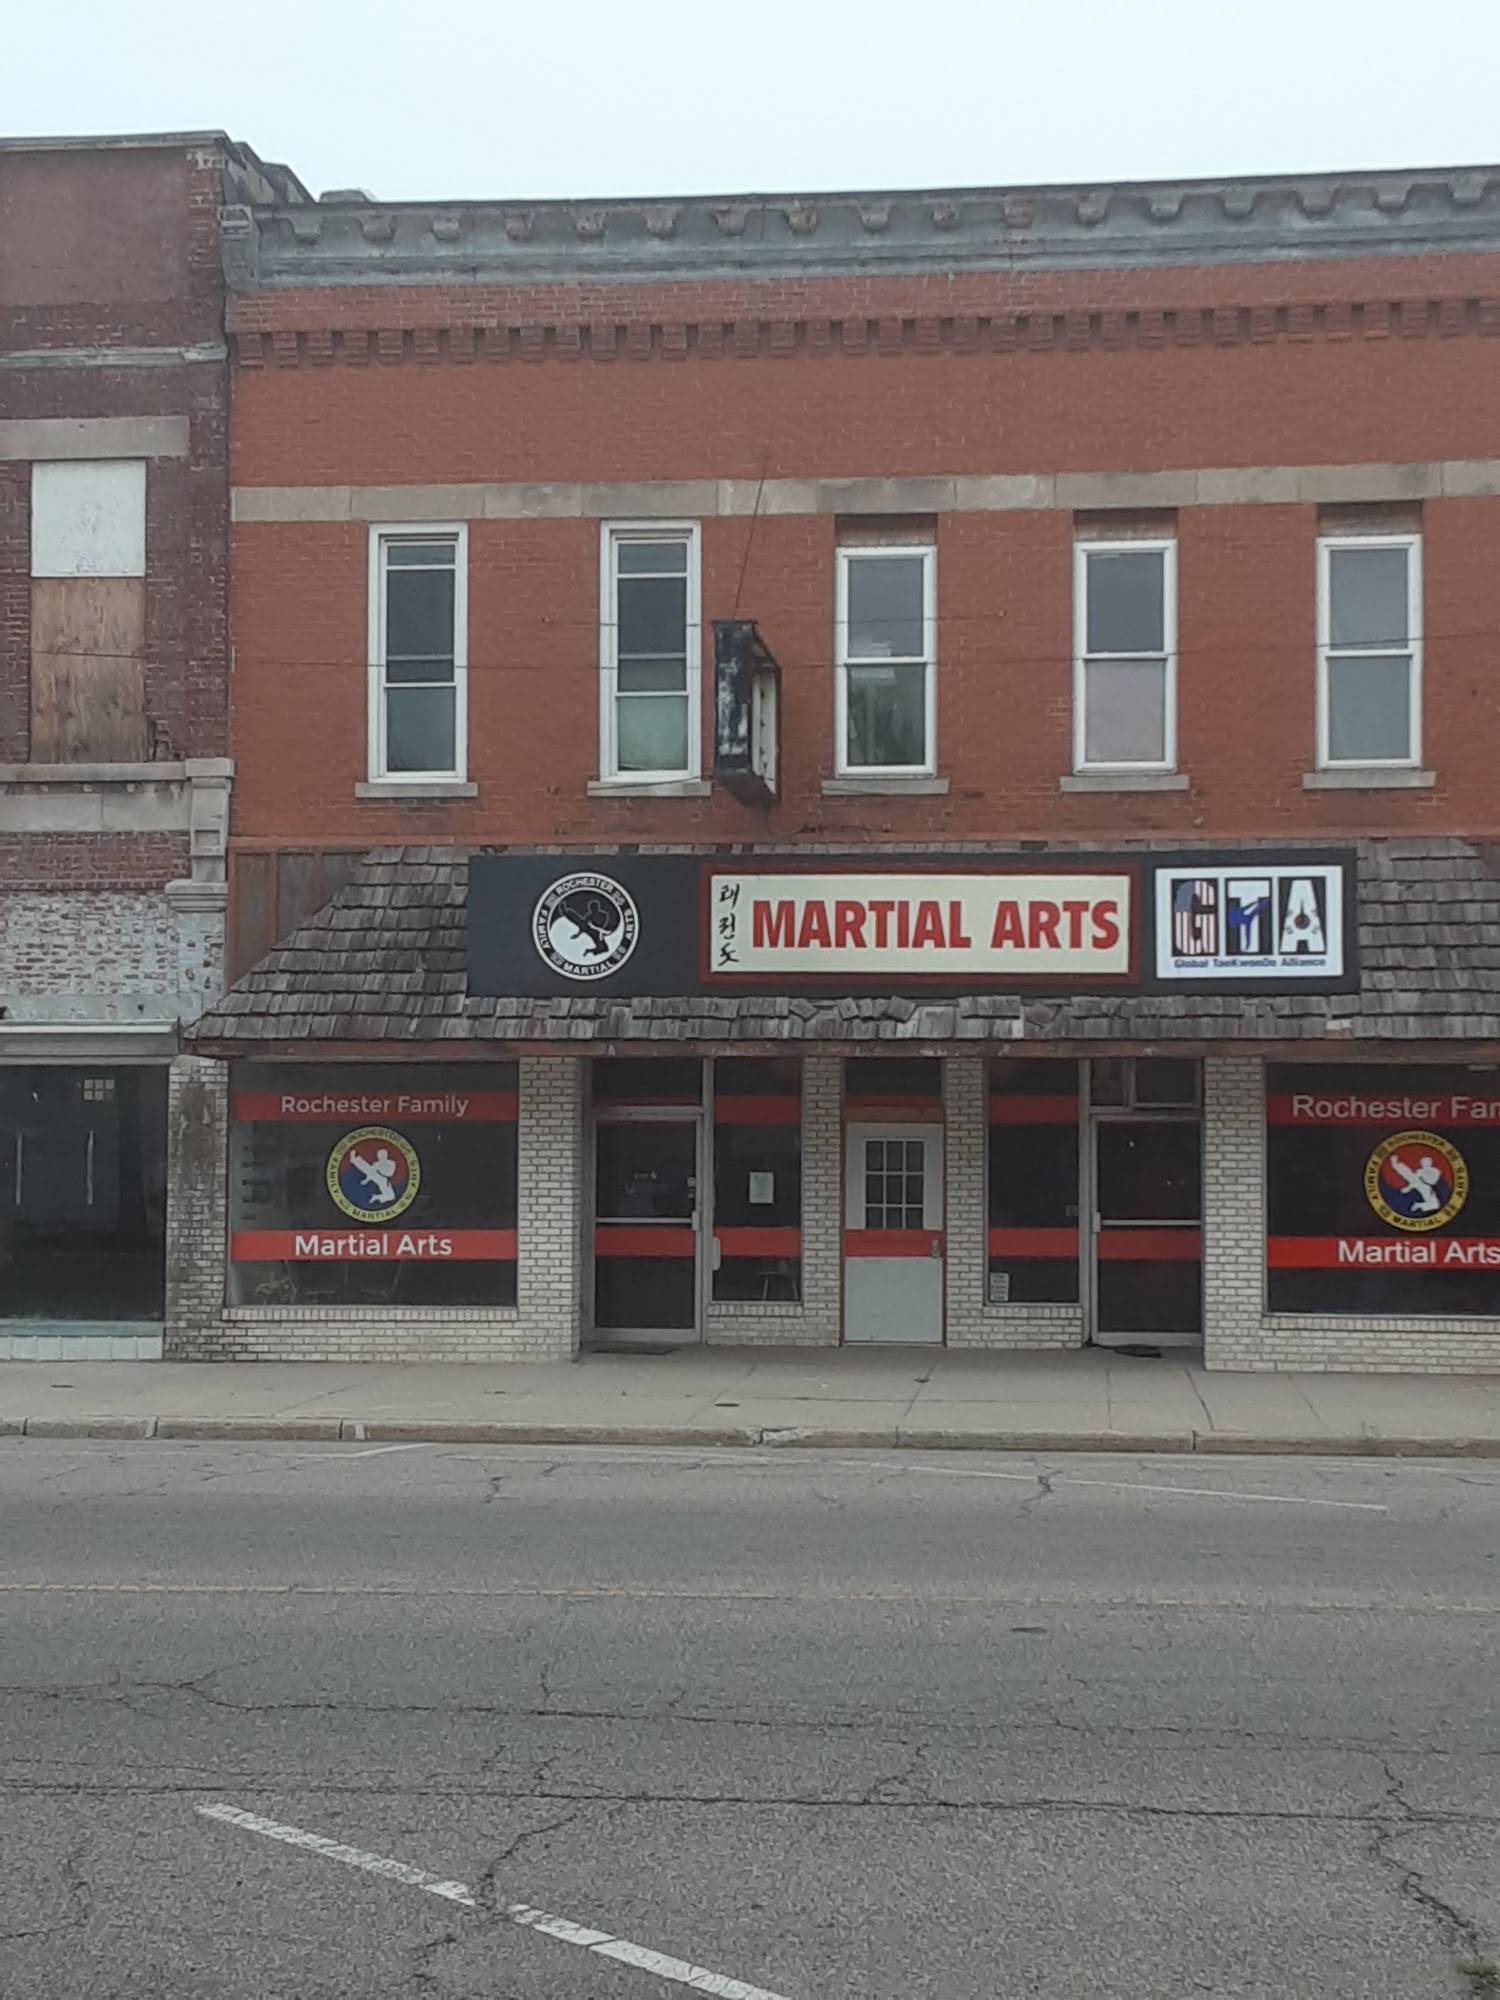 Rochester Family Martial Arts 626 Main St, Rochester Indiana 46975